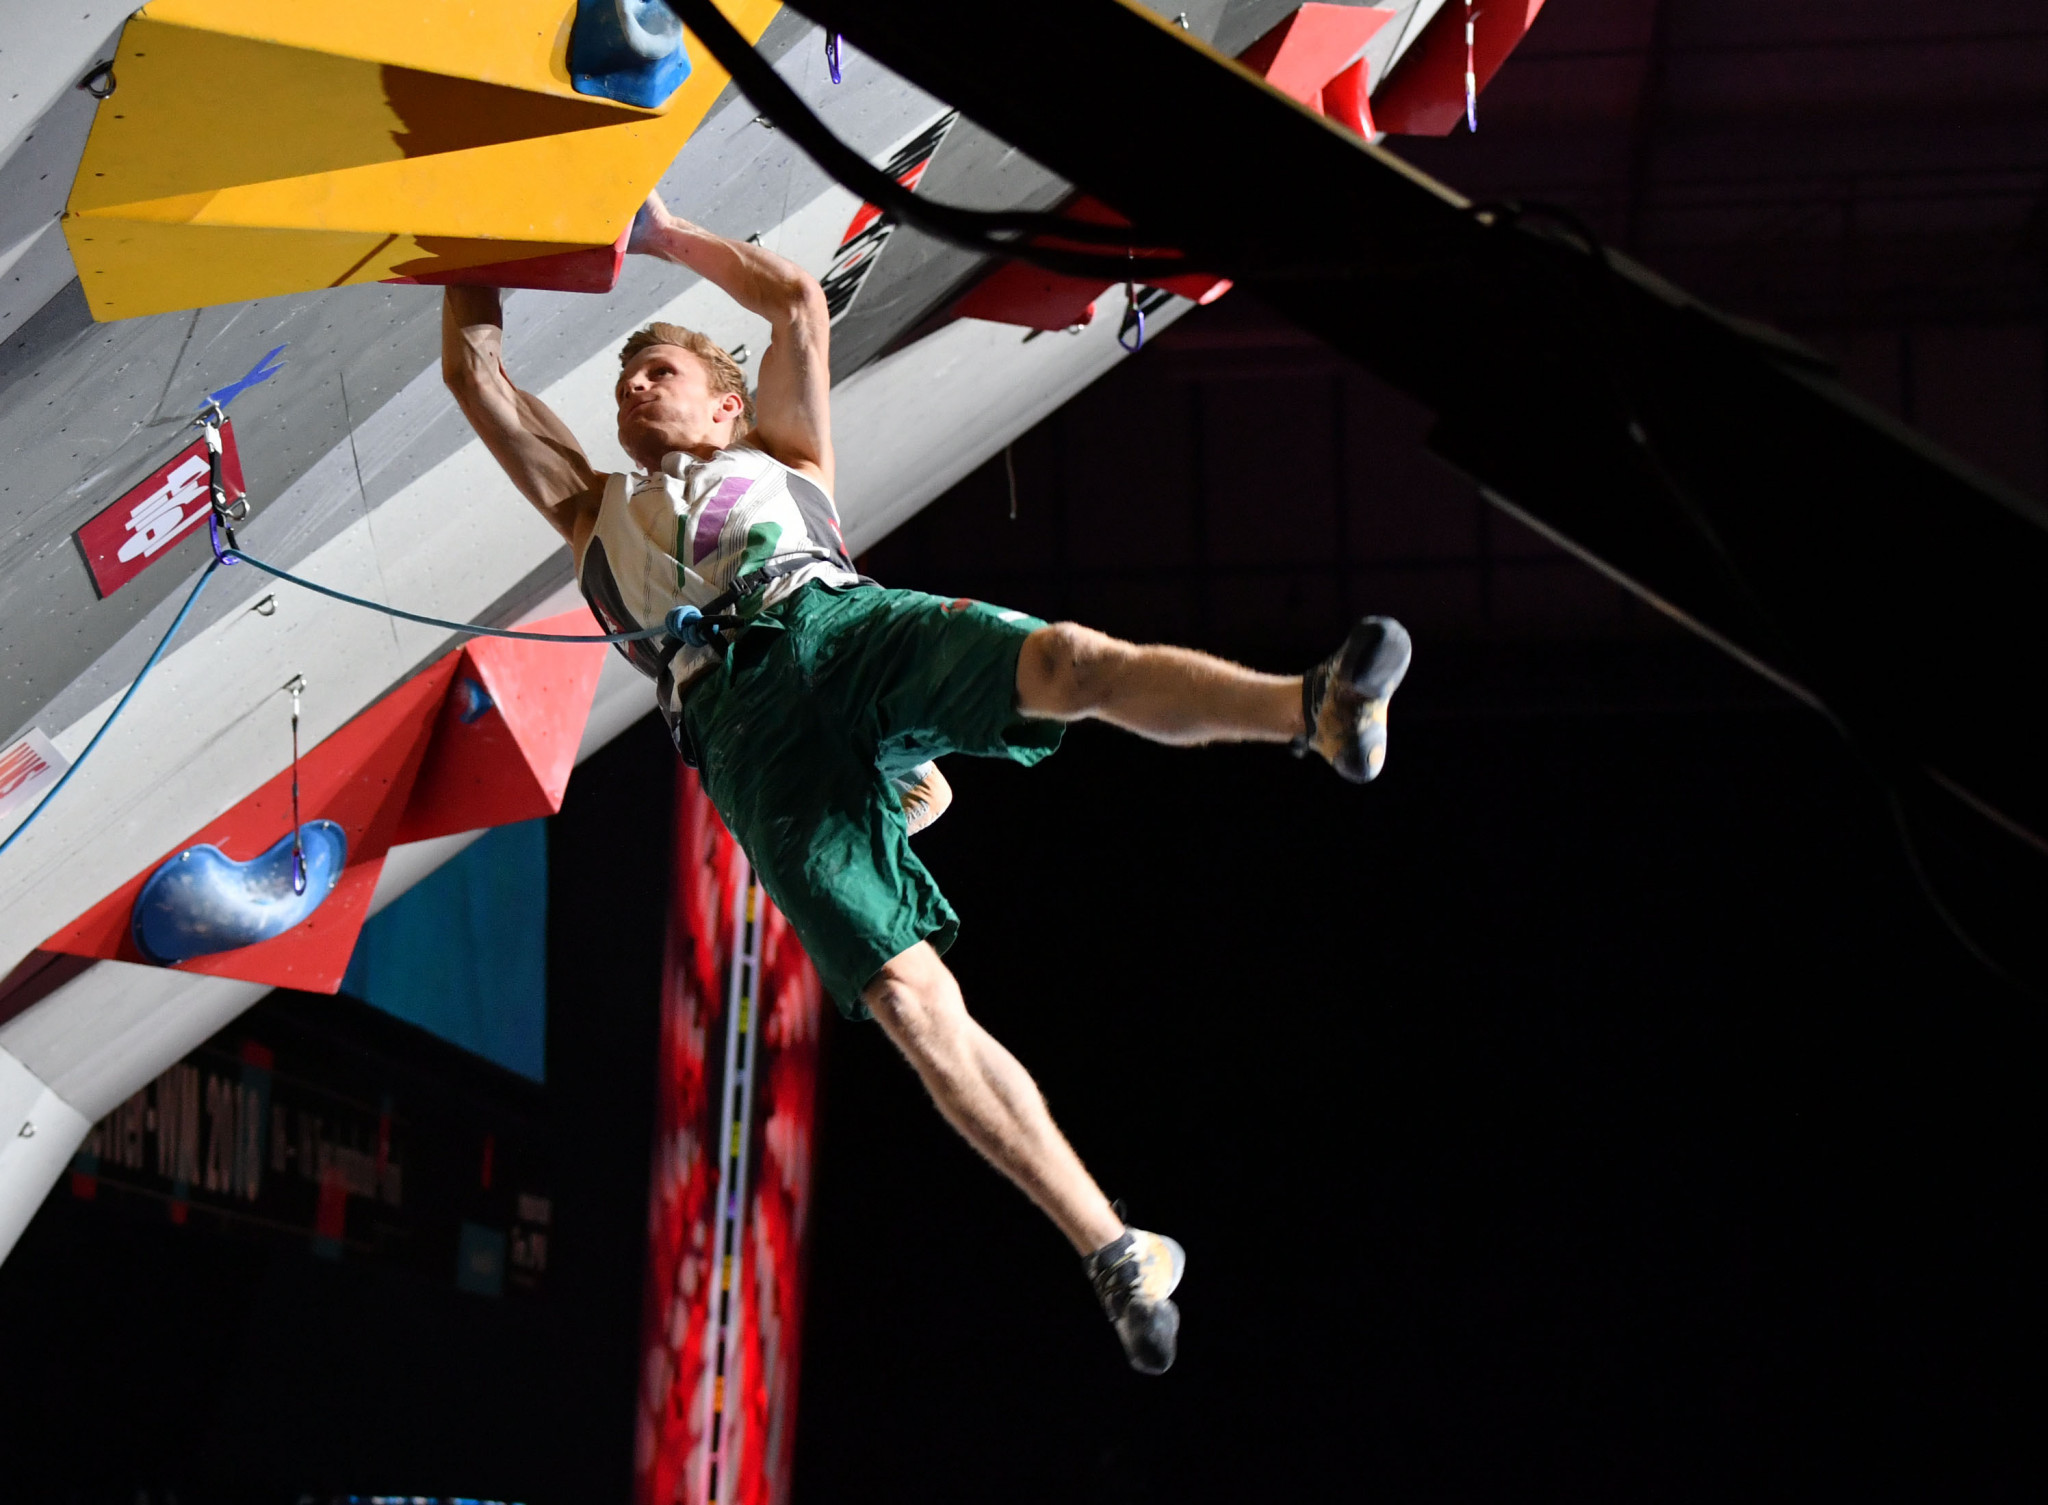 Rankings leaders in action as IFSC World Cup heads to China